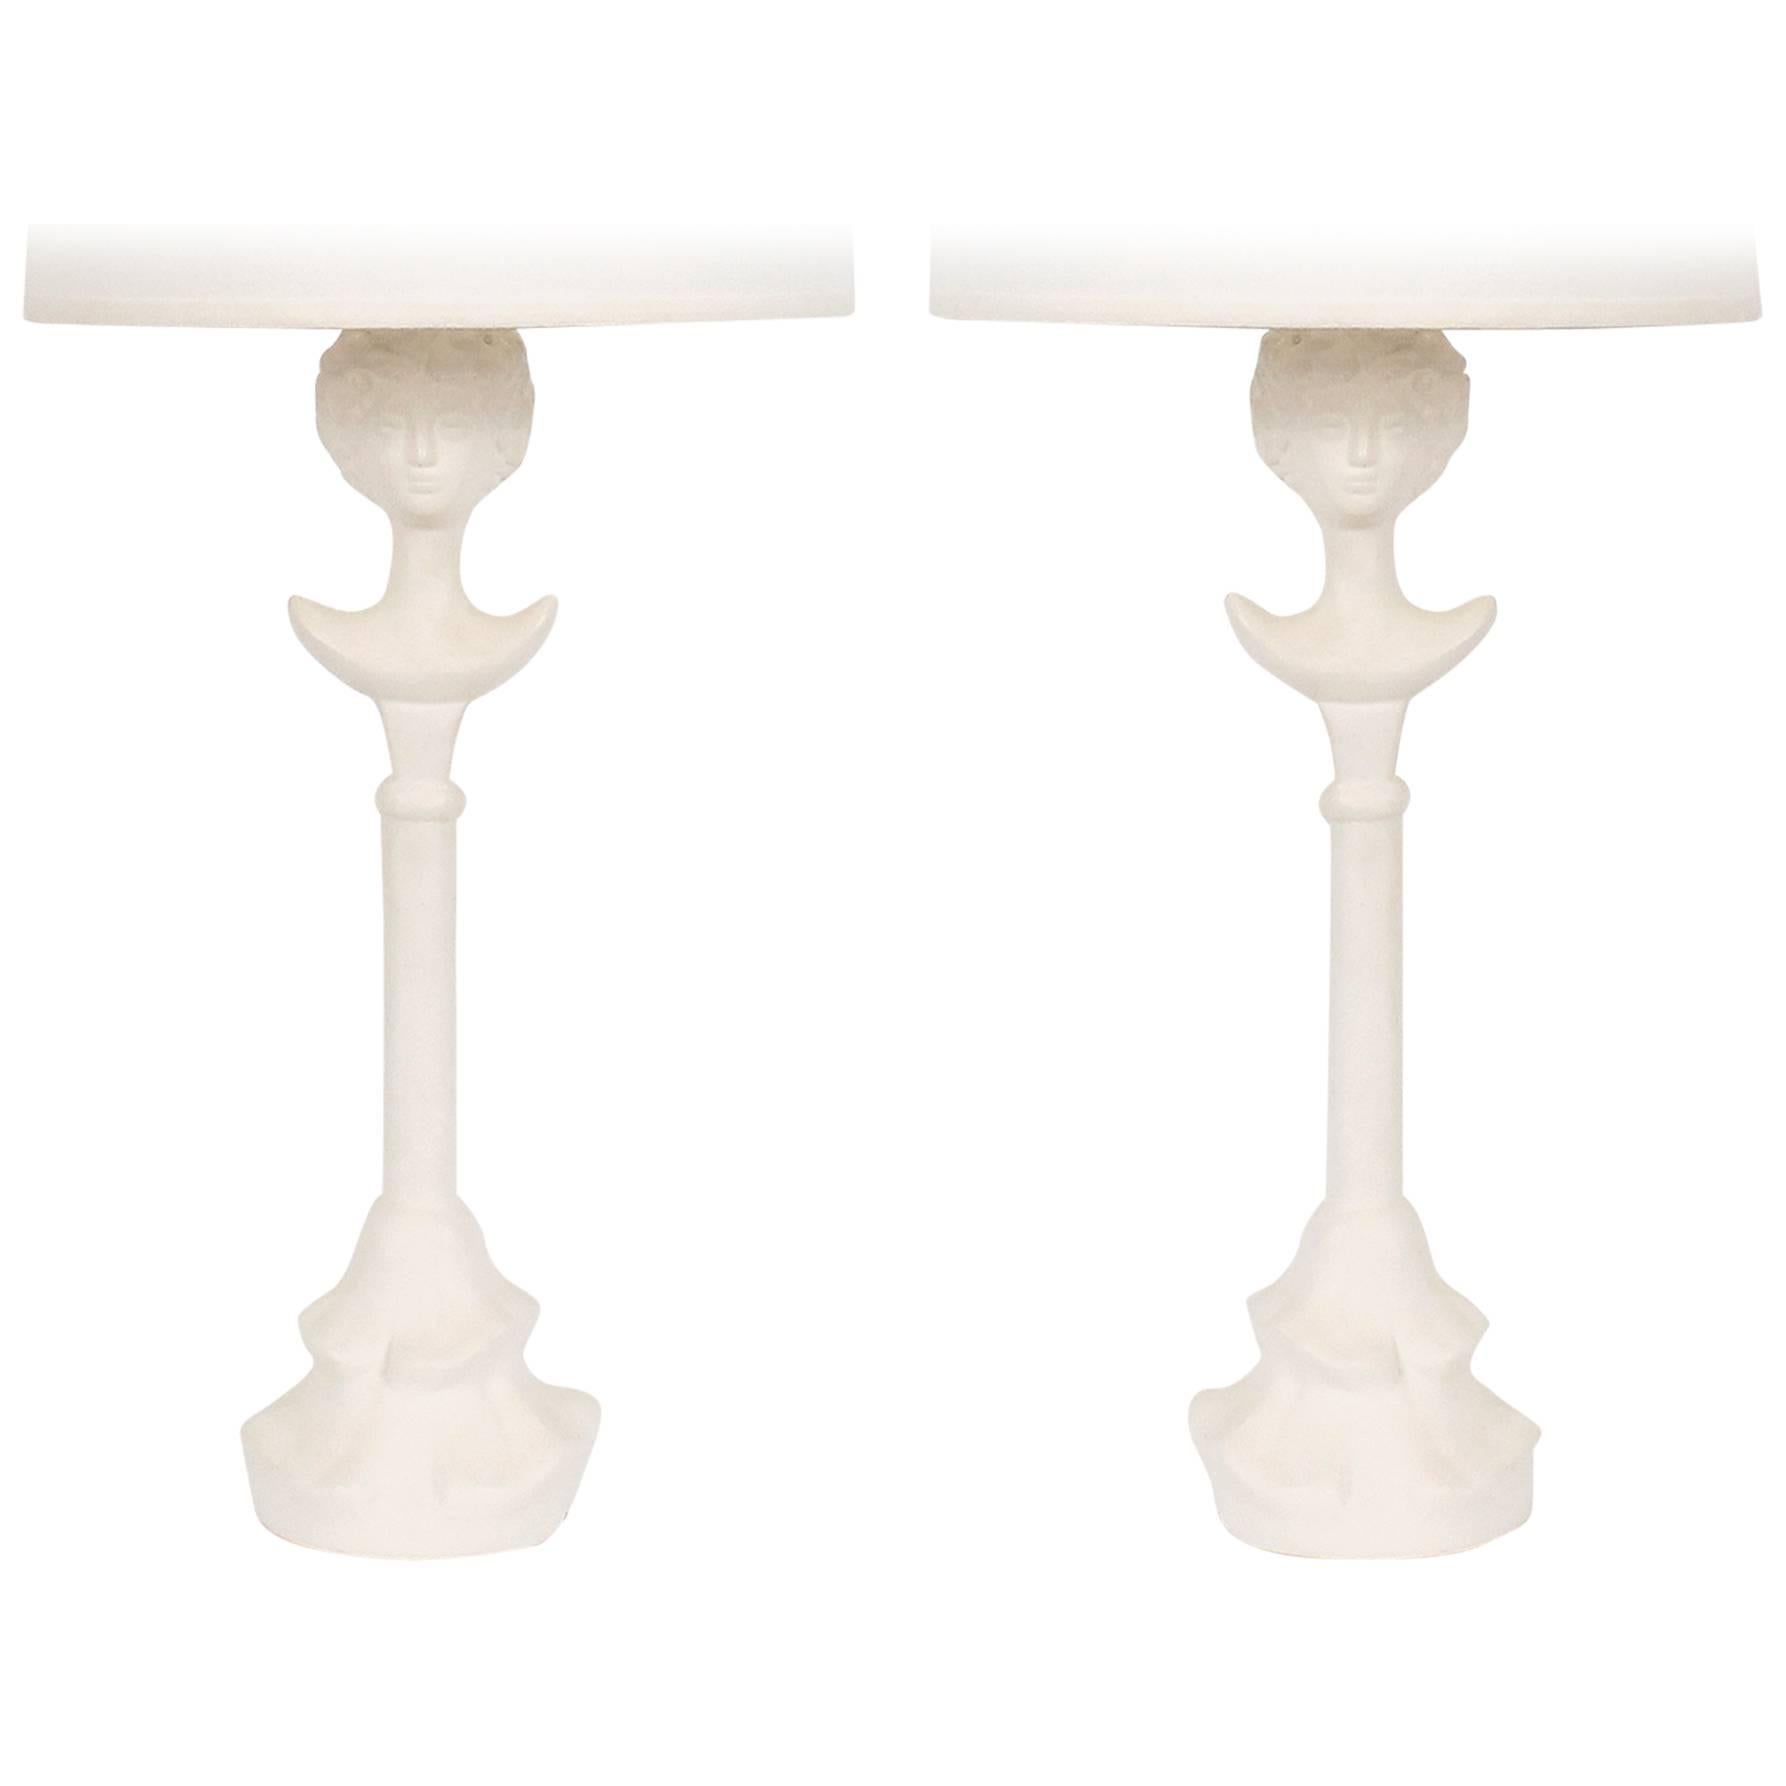 Pair of Figural Plaster Lamps after Giacometti